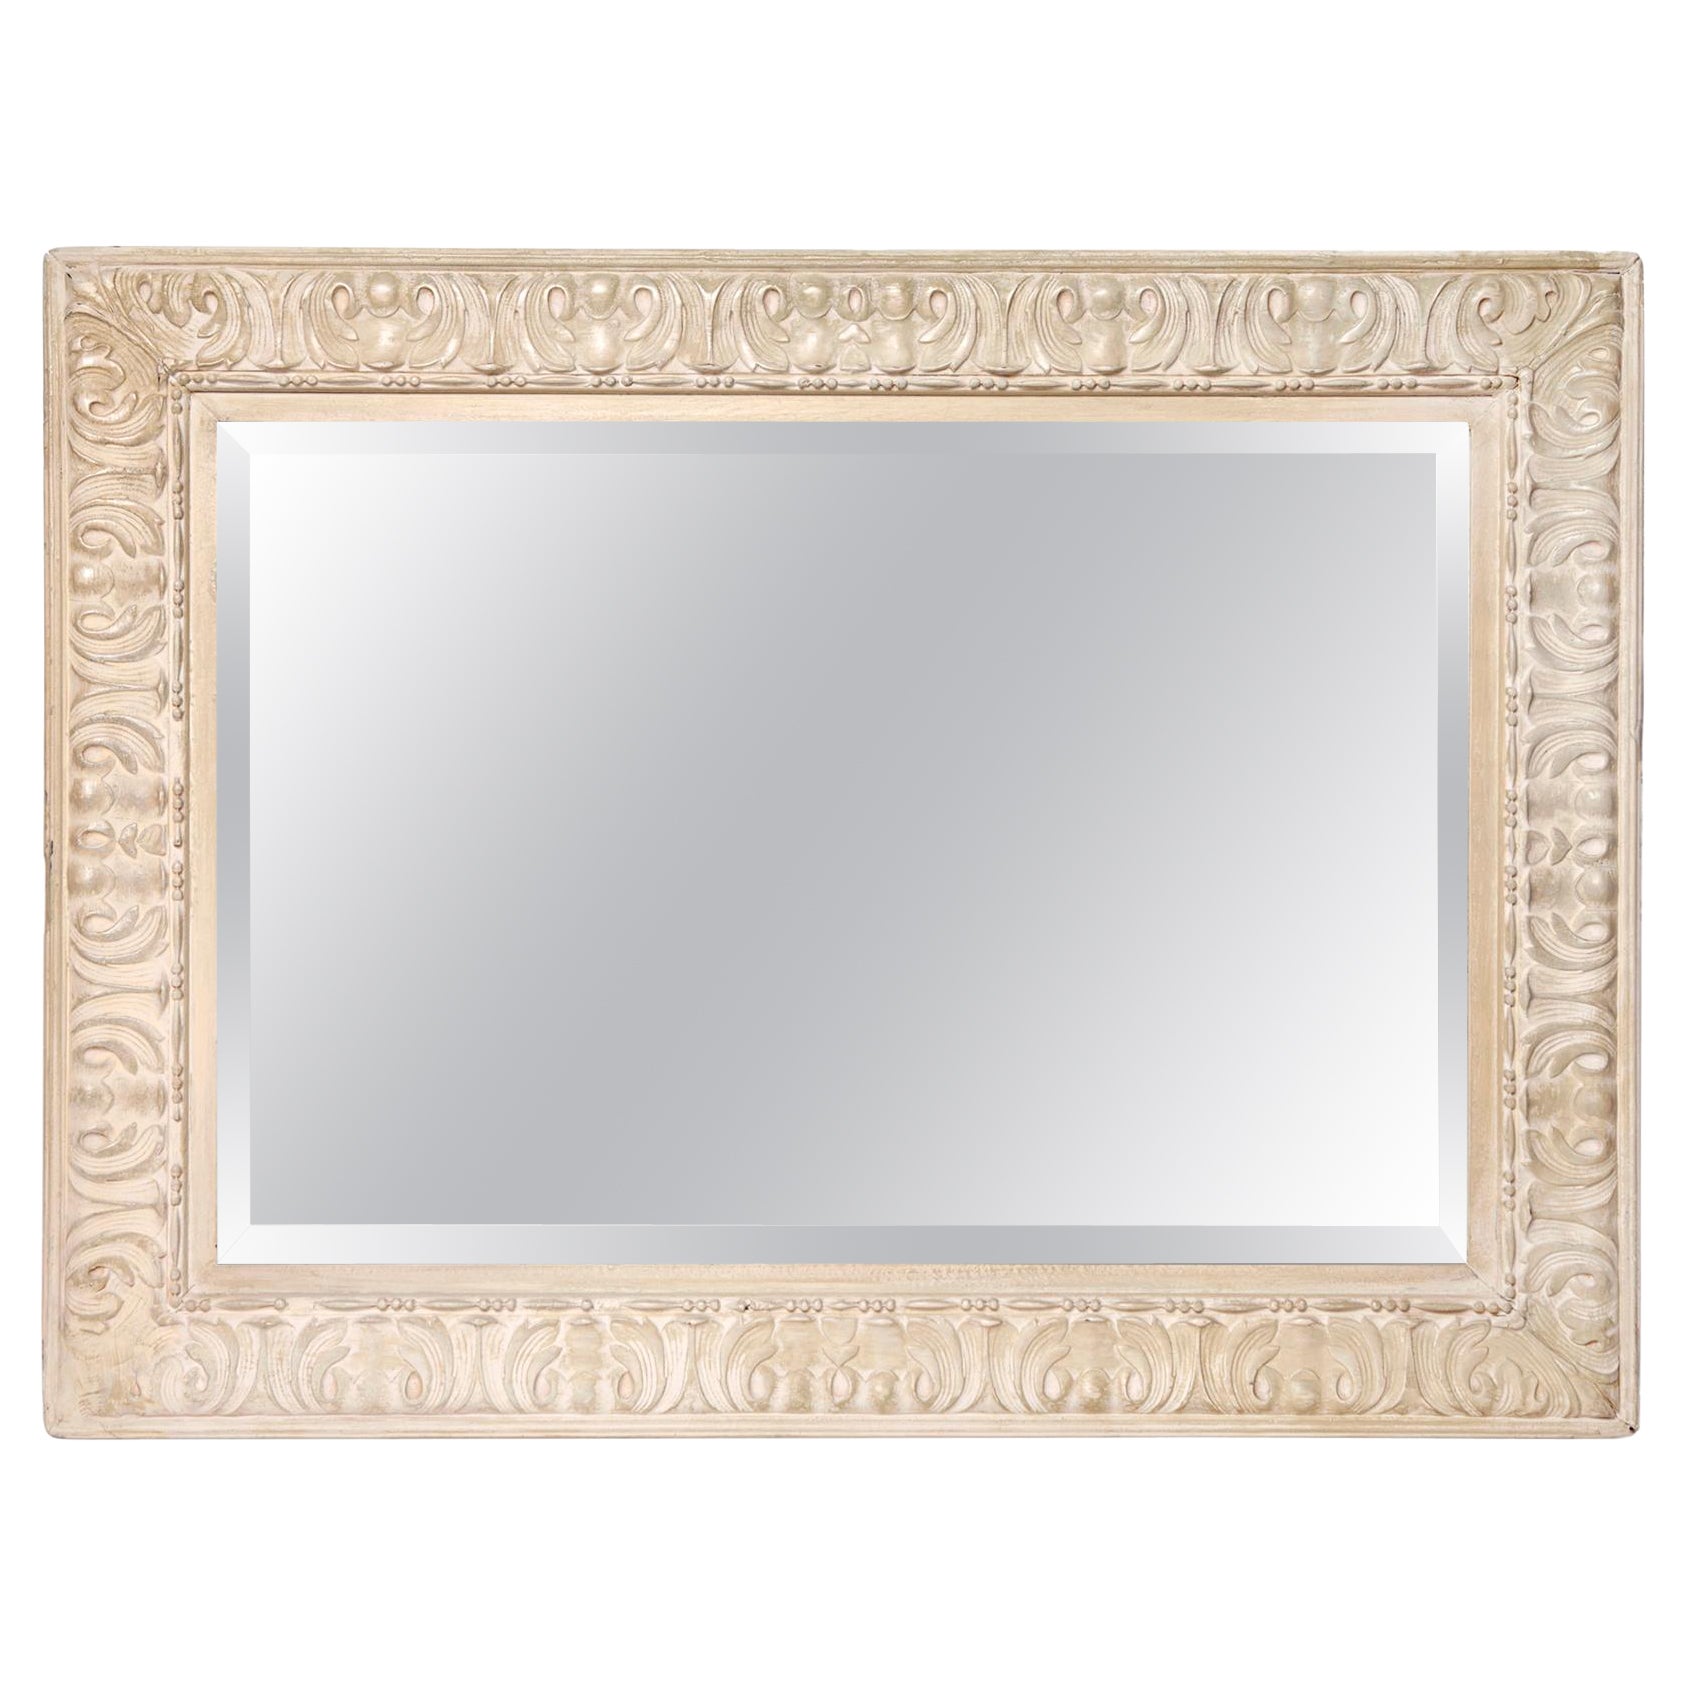 Early 20th Century Large Beveled Ivory Mirror For Sale